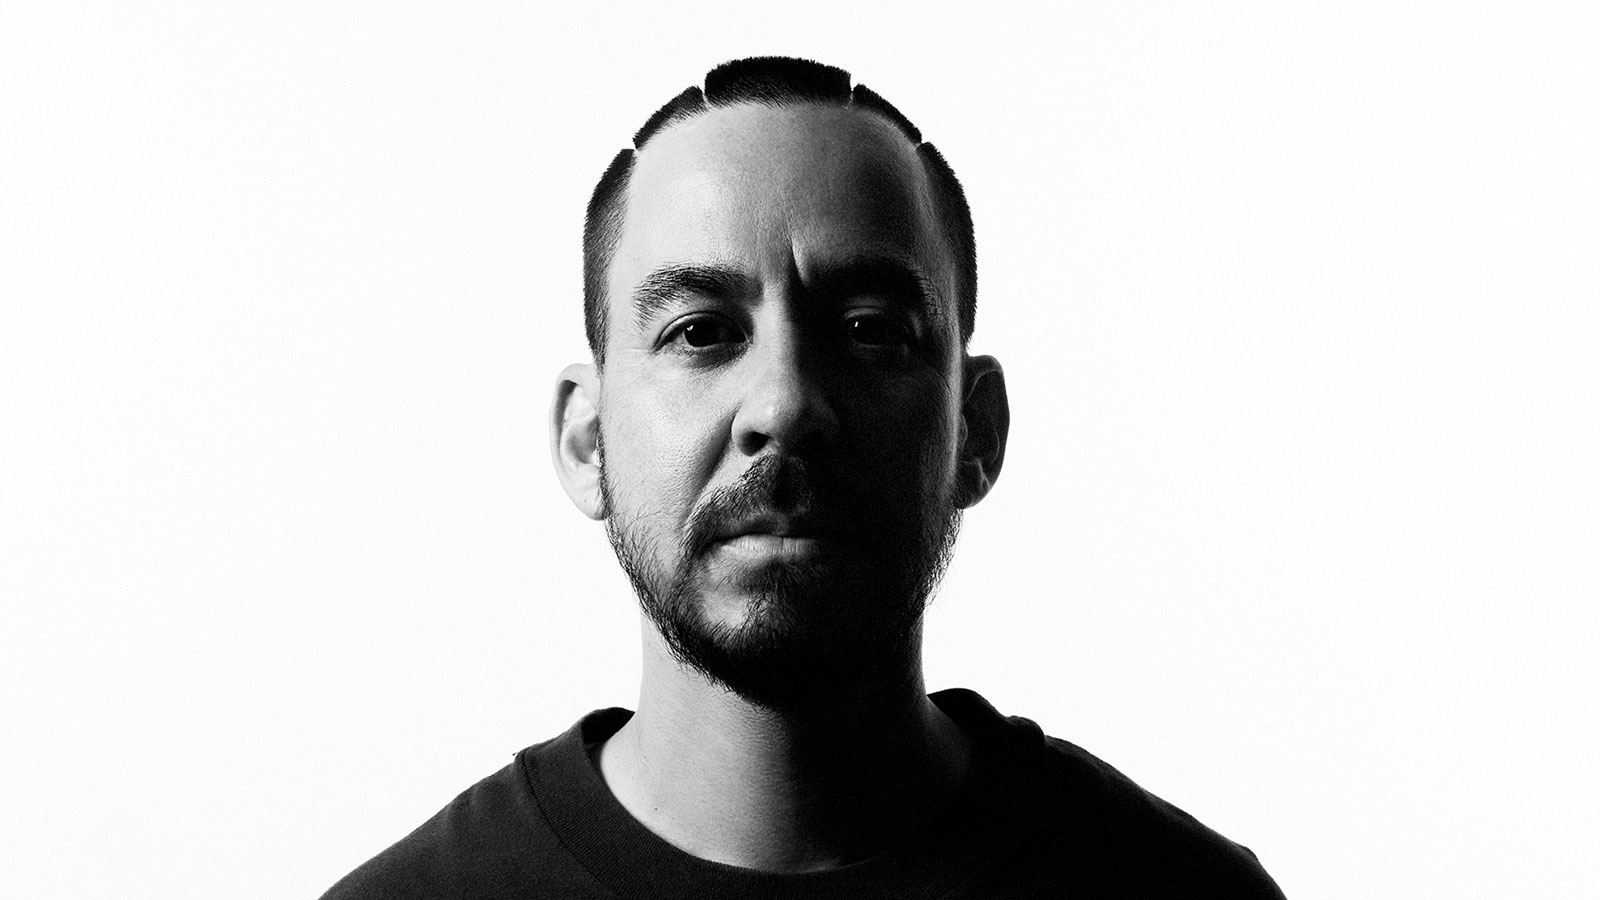 LINKIN PARK on Instagram: A note from @m_shinoda on his new song ALREADY  OVER - Stream / Save / Share mshnd.co/alreadyover